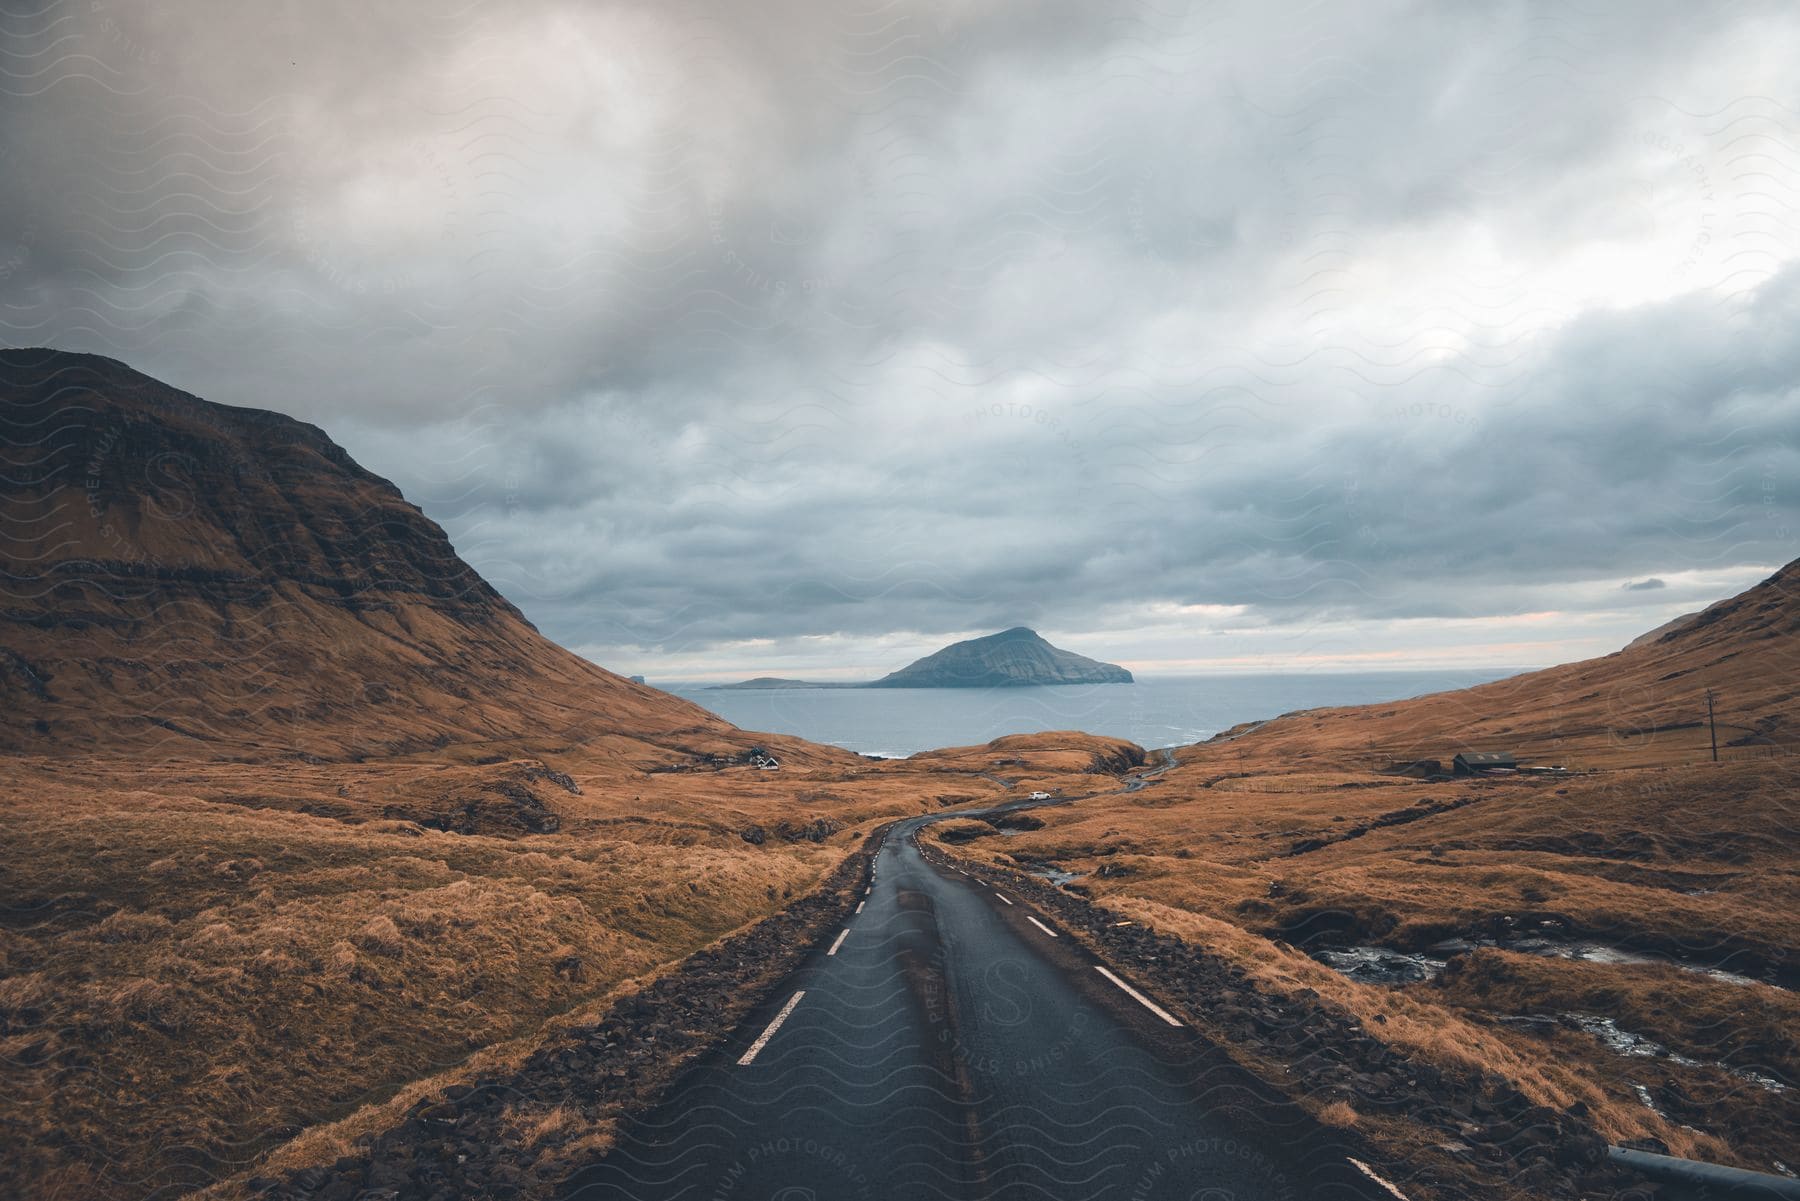 A mountain road leading to the coast with a distant mountain island under a cloudy sky